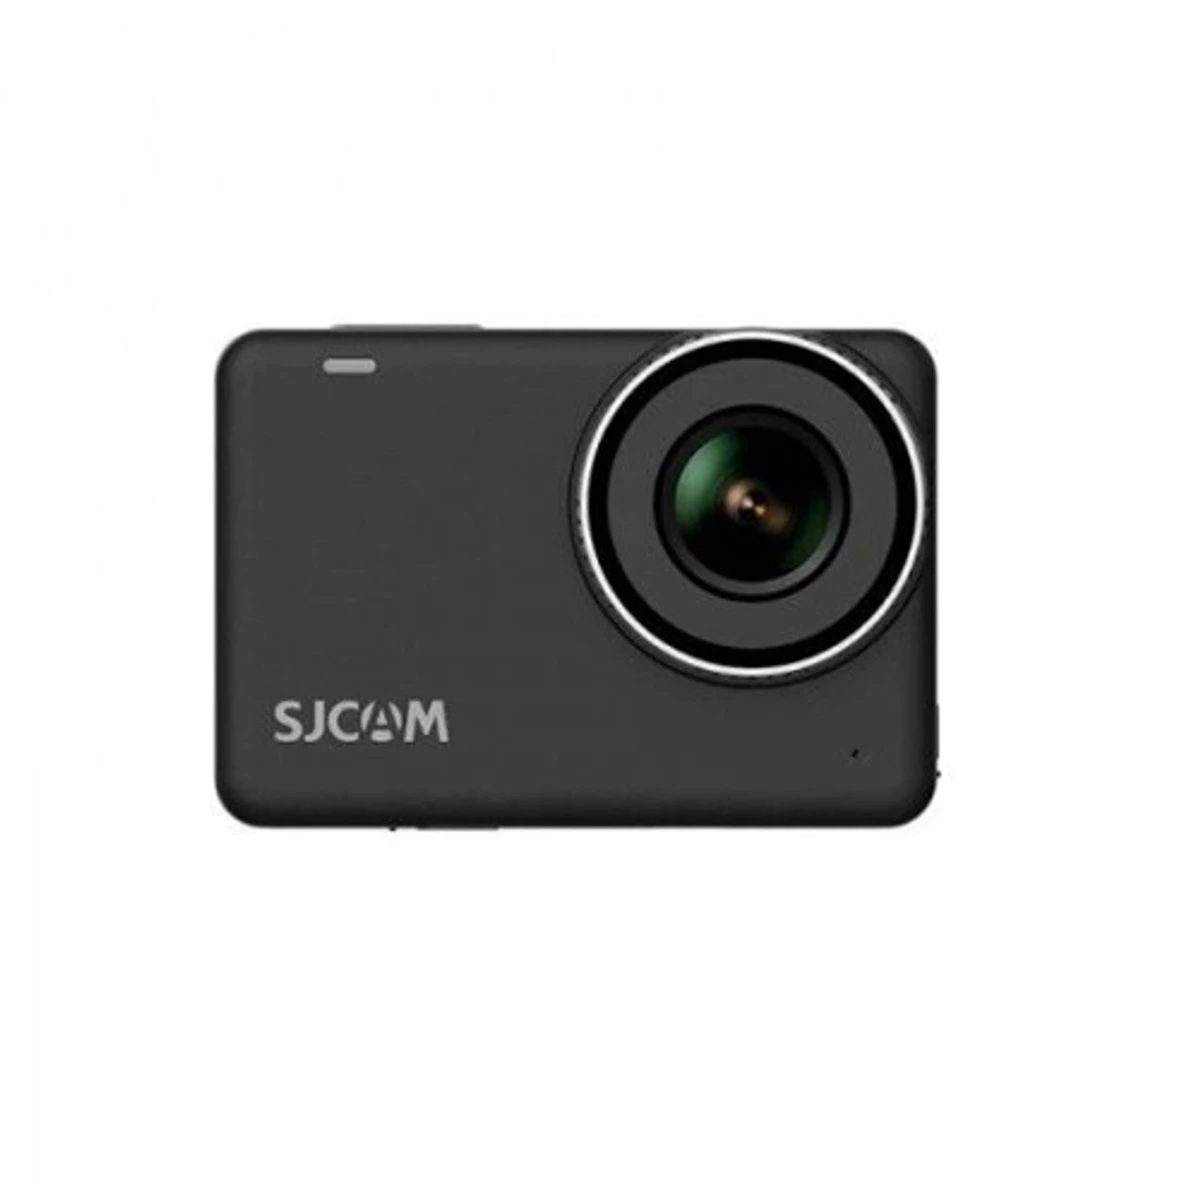 SJCAM SJ10 X 4K Action Camera (12 MP, 4K Up To 120fps, UHD IPS 2.33" Touch Display)